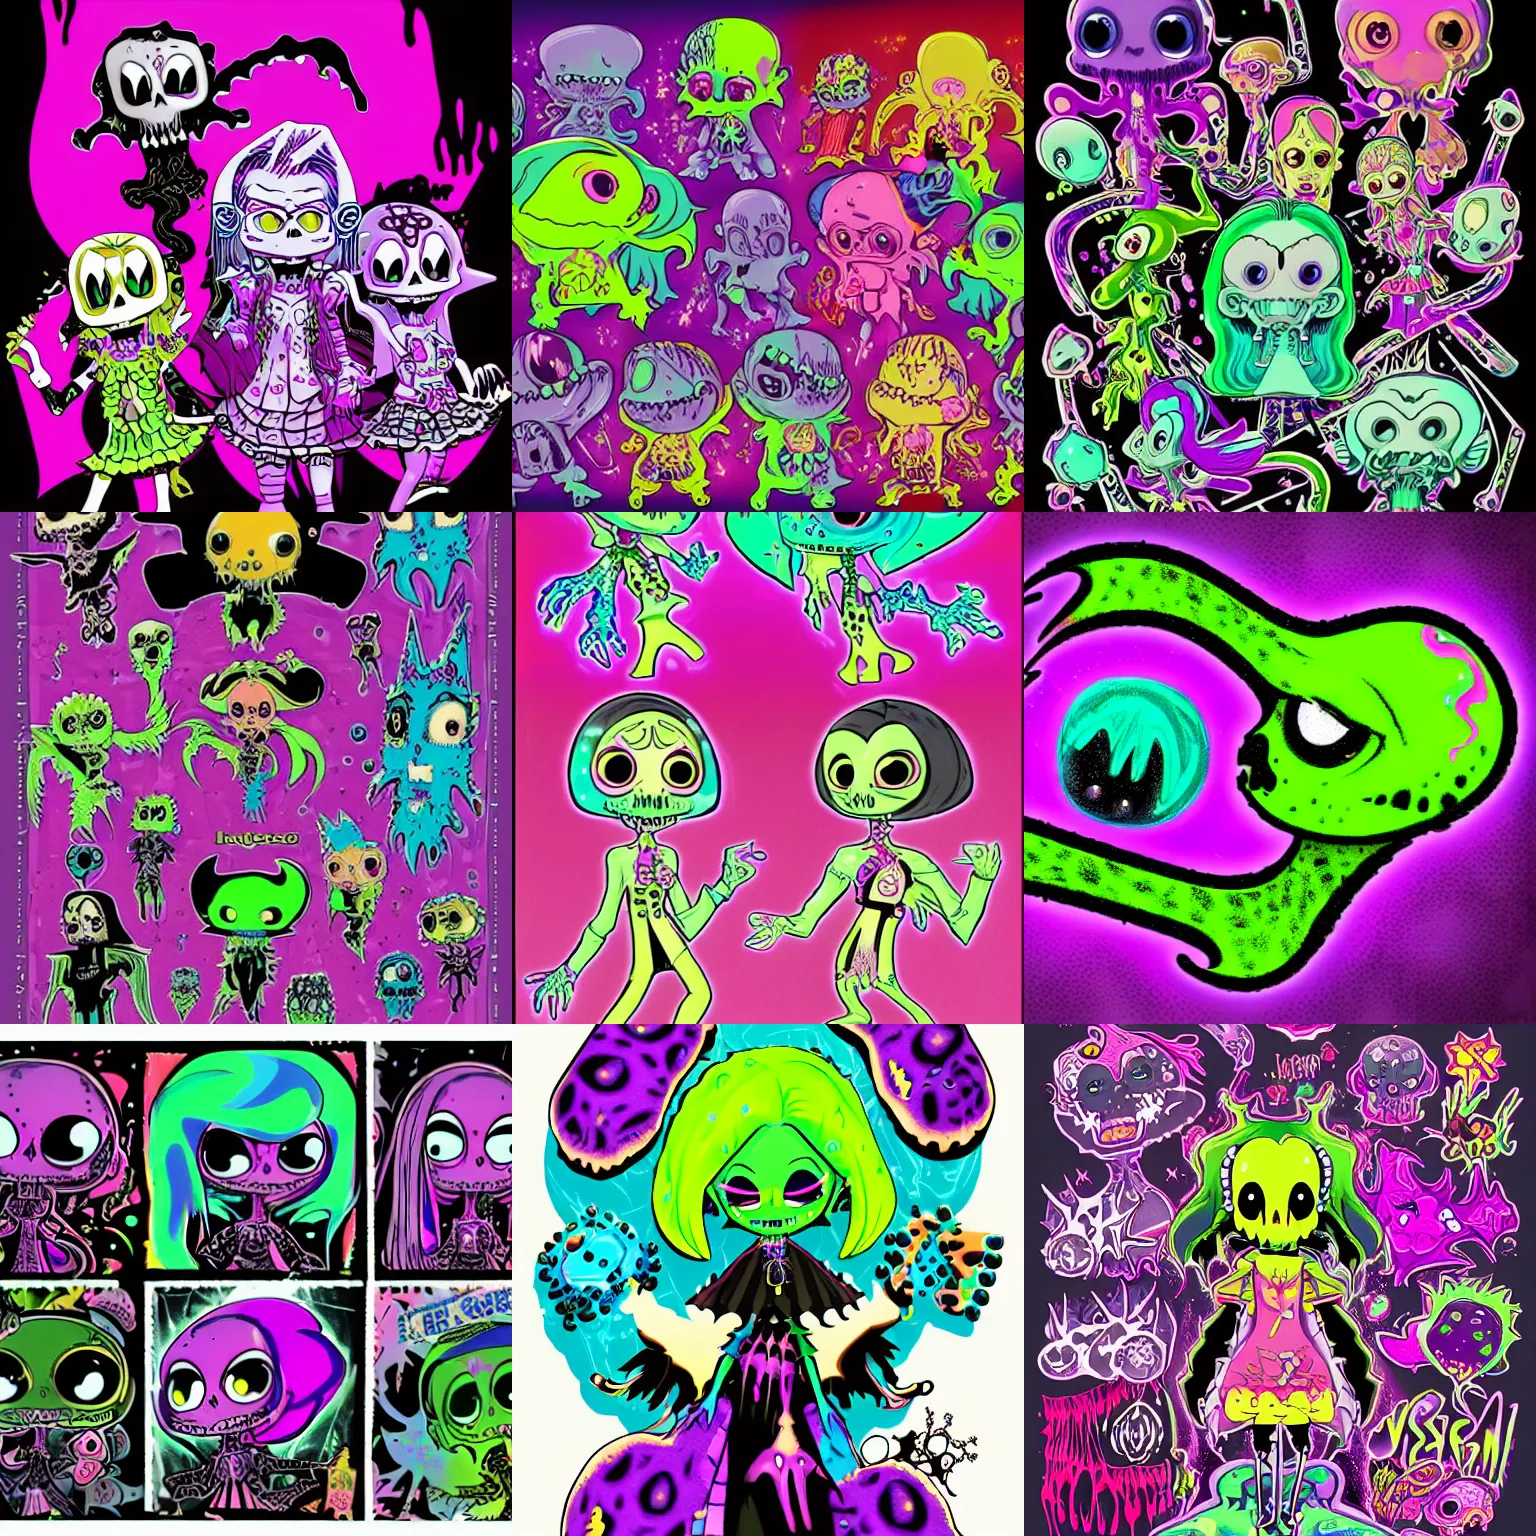 Prompt: lisa frank gothic punk toxic bioluminescent glow in the dark bones vampiric rockstar vampire squid concept character designs of various shapes and sizes by genndy tartakovsky and the creators of fret nice at pieces interactive and splatoon by nintendo and the psychonauts by doublefine tim shafer artists for the new hotel transylvania film managed by pixar and overseen by Jamie Hewlett from gorillaz